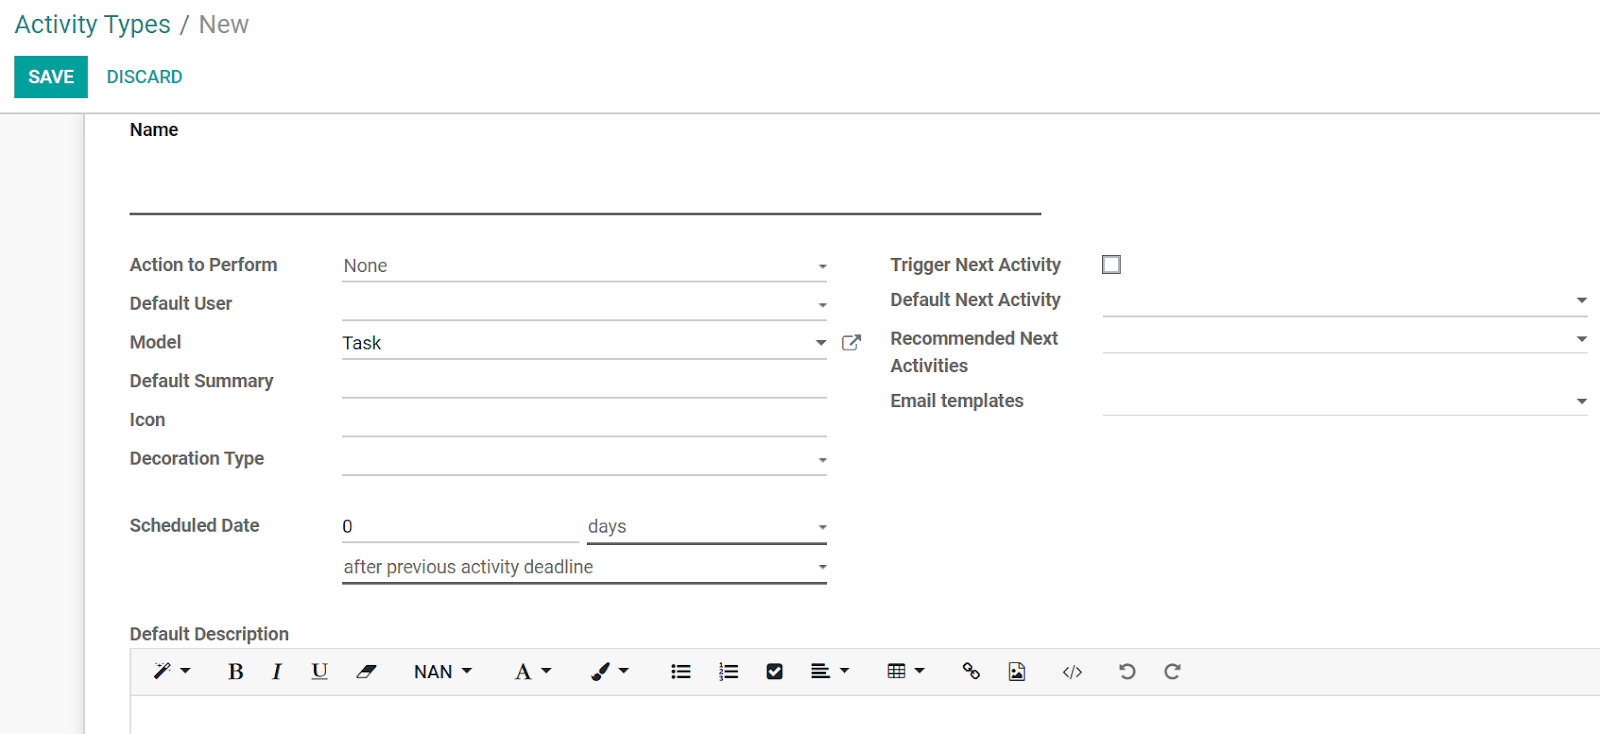 Overview of the activity types form in Odoo Project